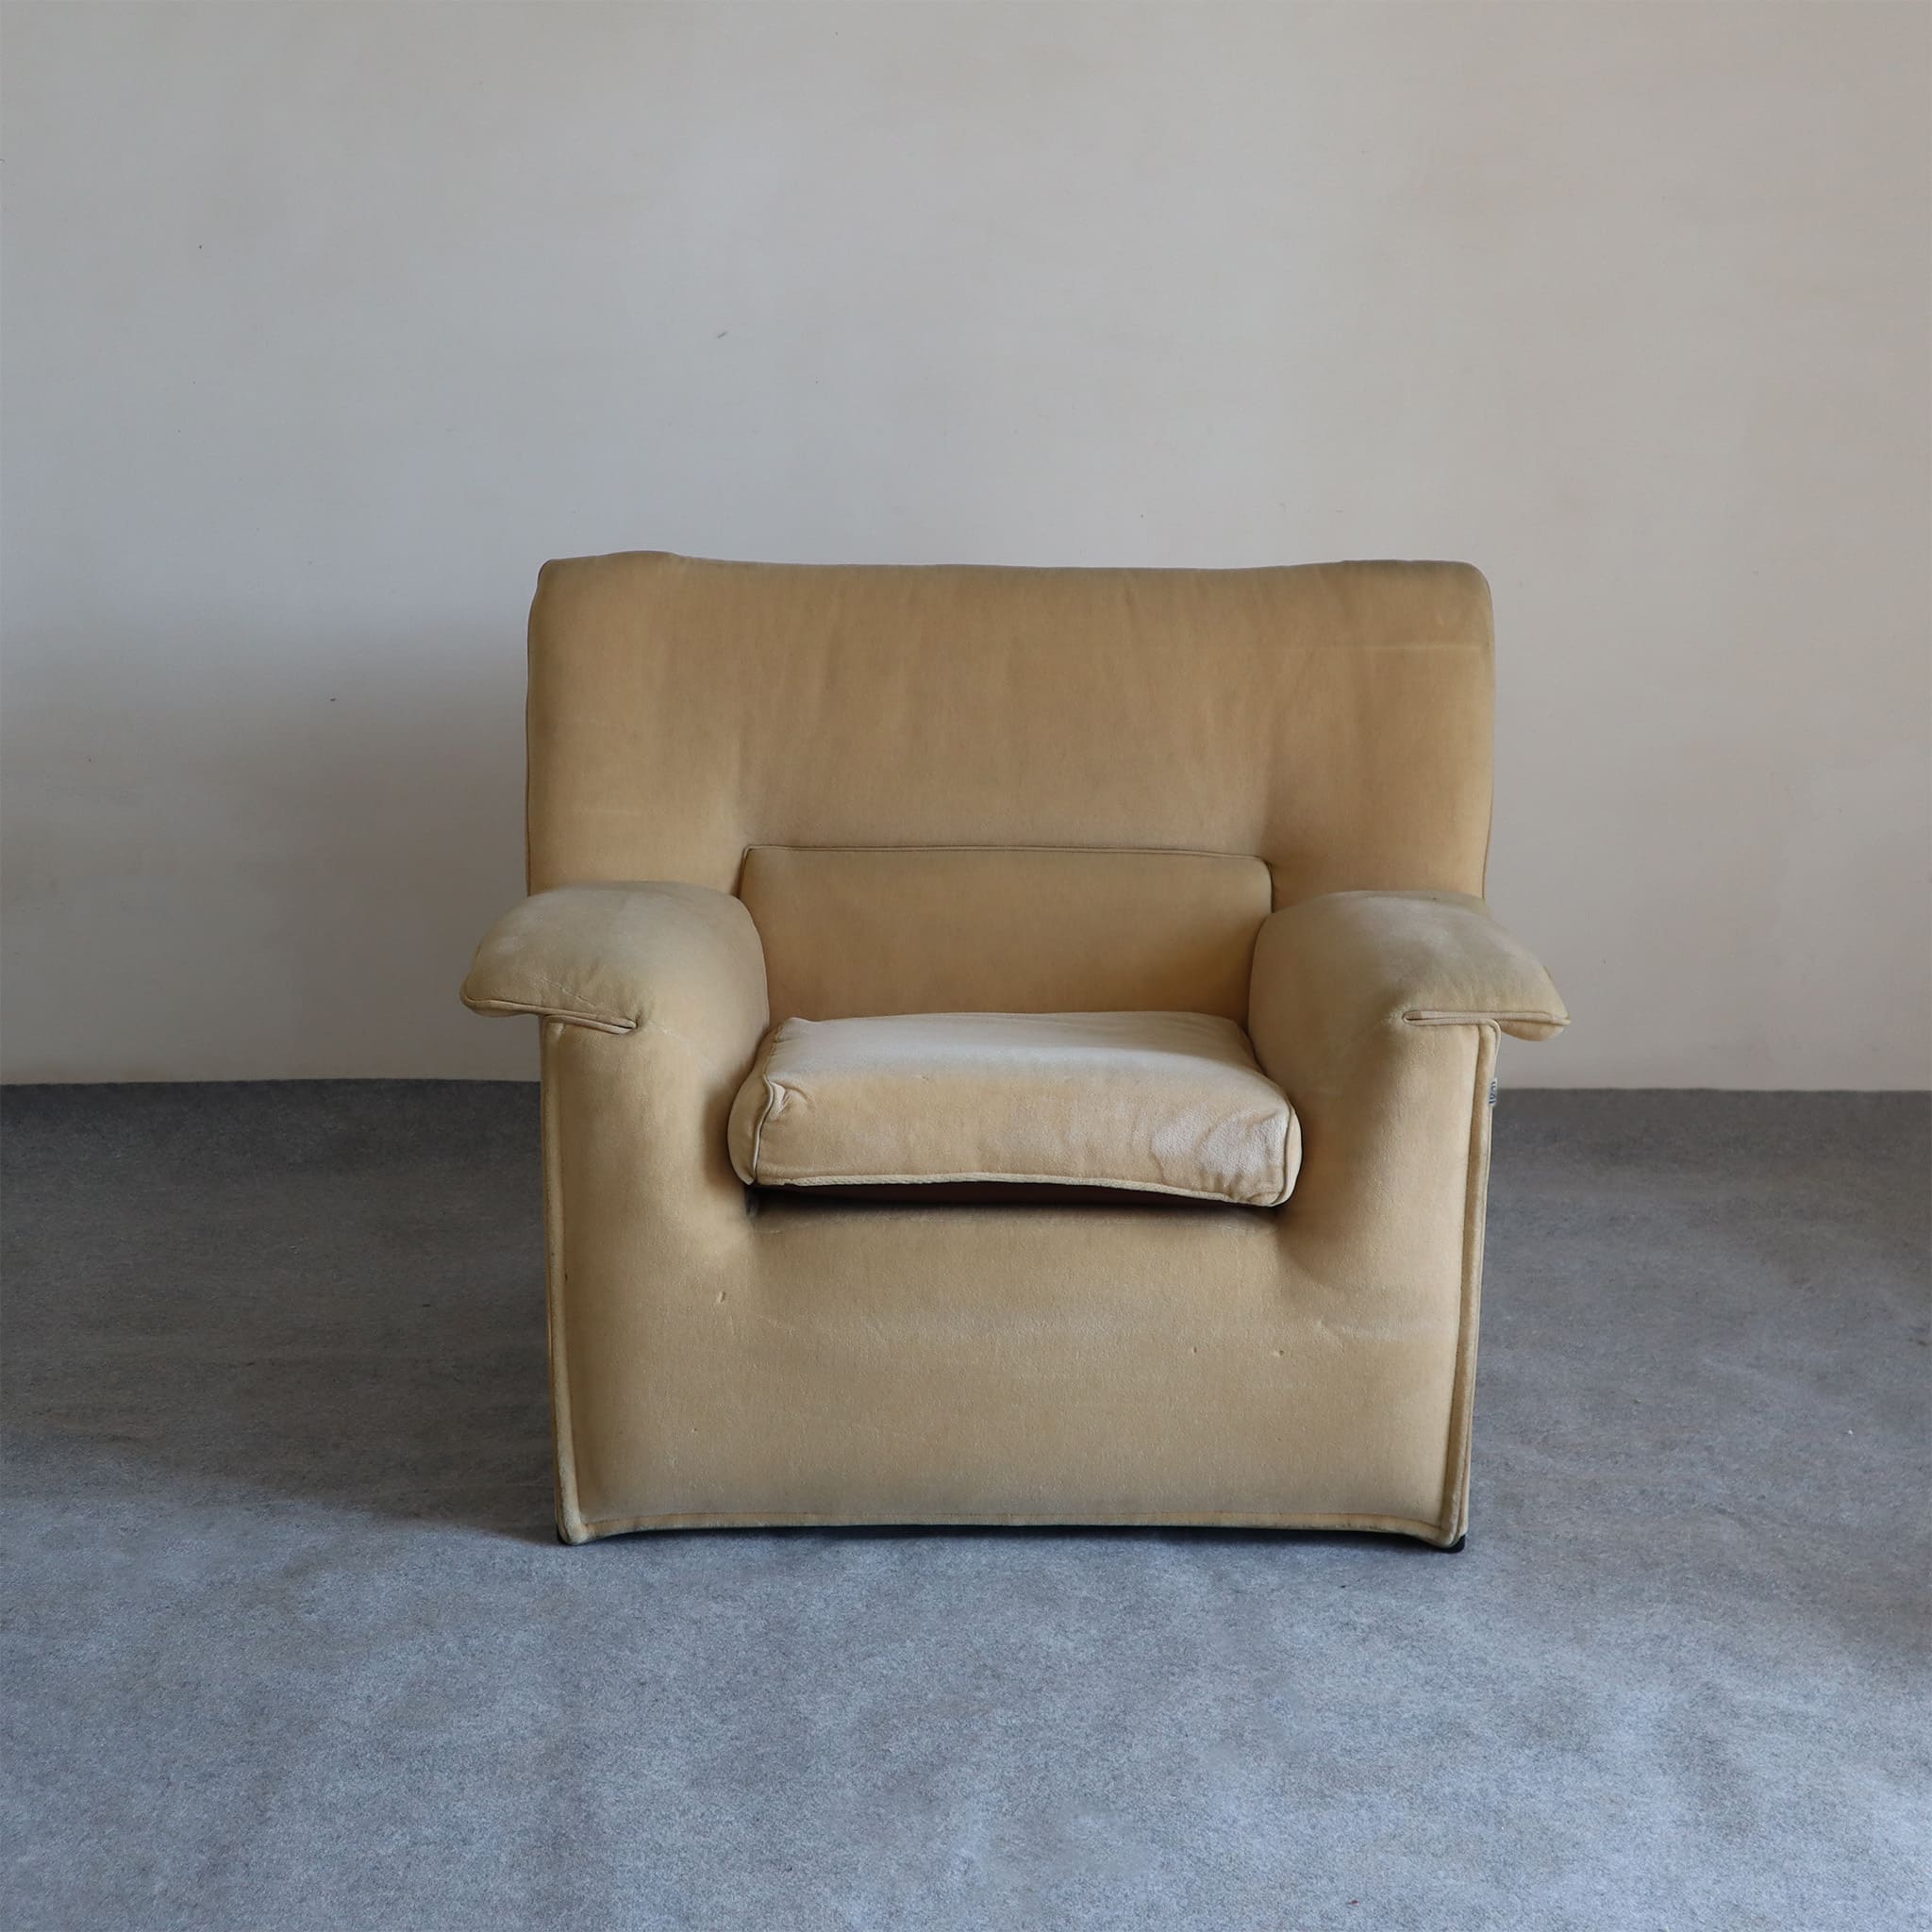 visionidepoca-modern-art-seating-lauriana-armchair-b&b-italia-by-afra-e-tobia-scarpa-made-in-italy-70s-front-view